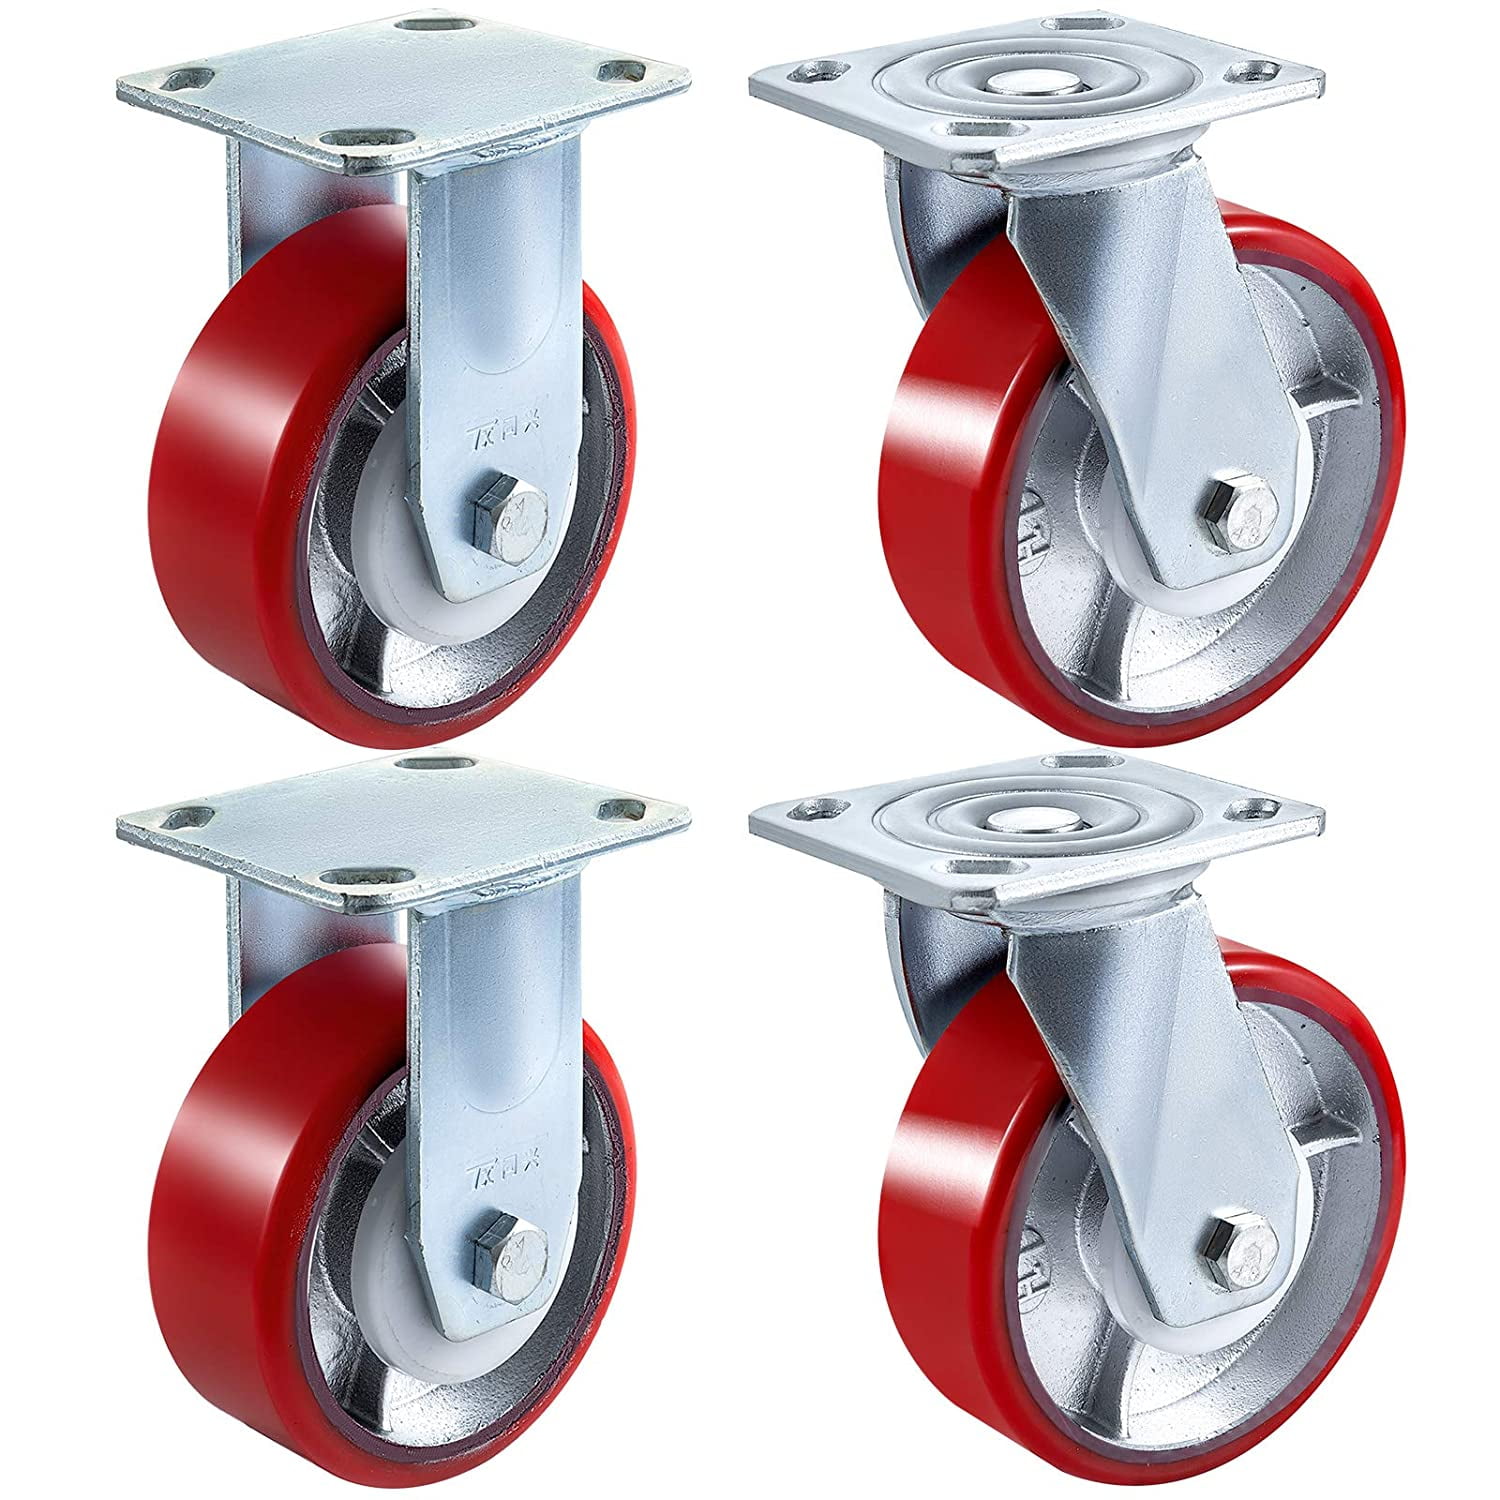 Set of 4 Plate Casters with 5" Polyurethane Wheels 2 Swivel and 2 Rigid 